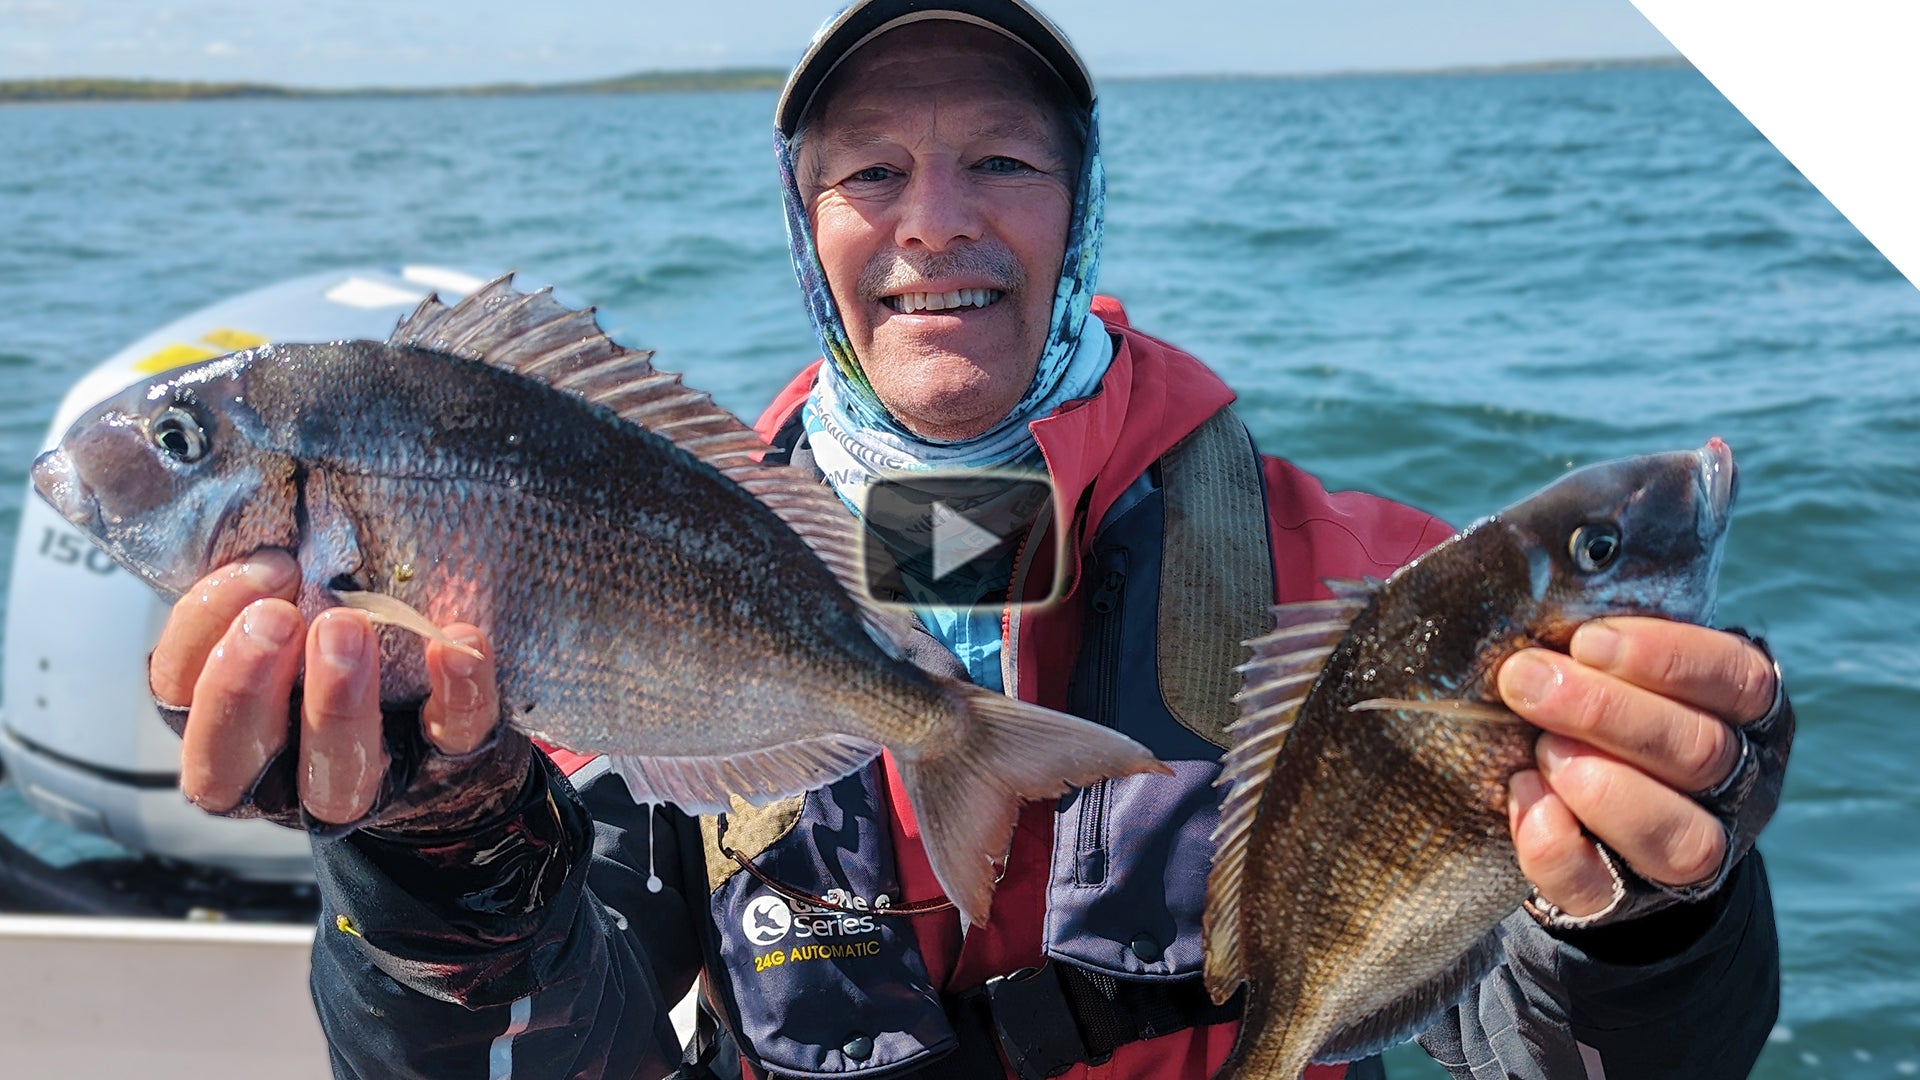 Scup Fishing - Porgy Fishing, using artificial bait and Porgy Rigs